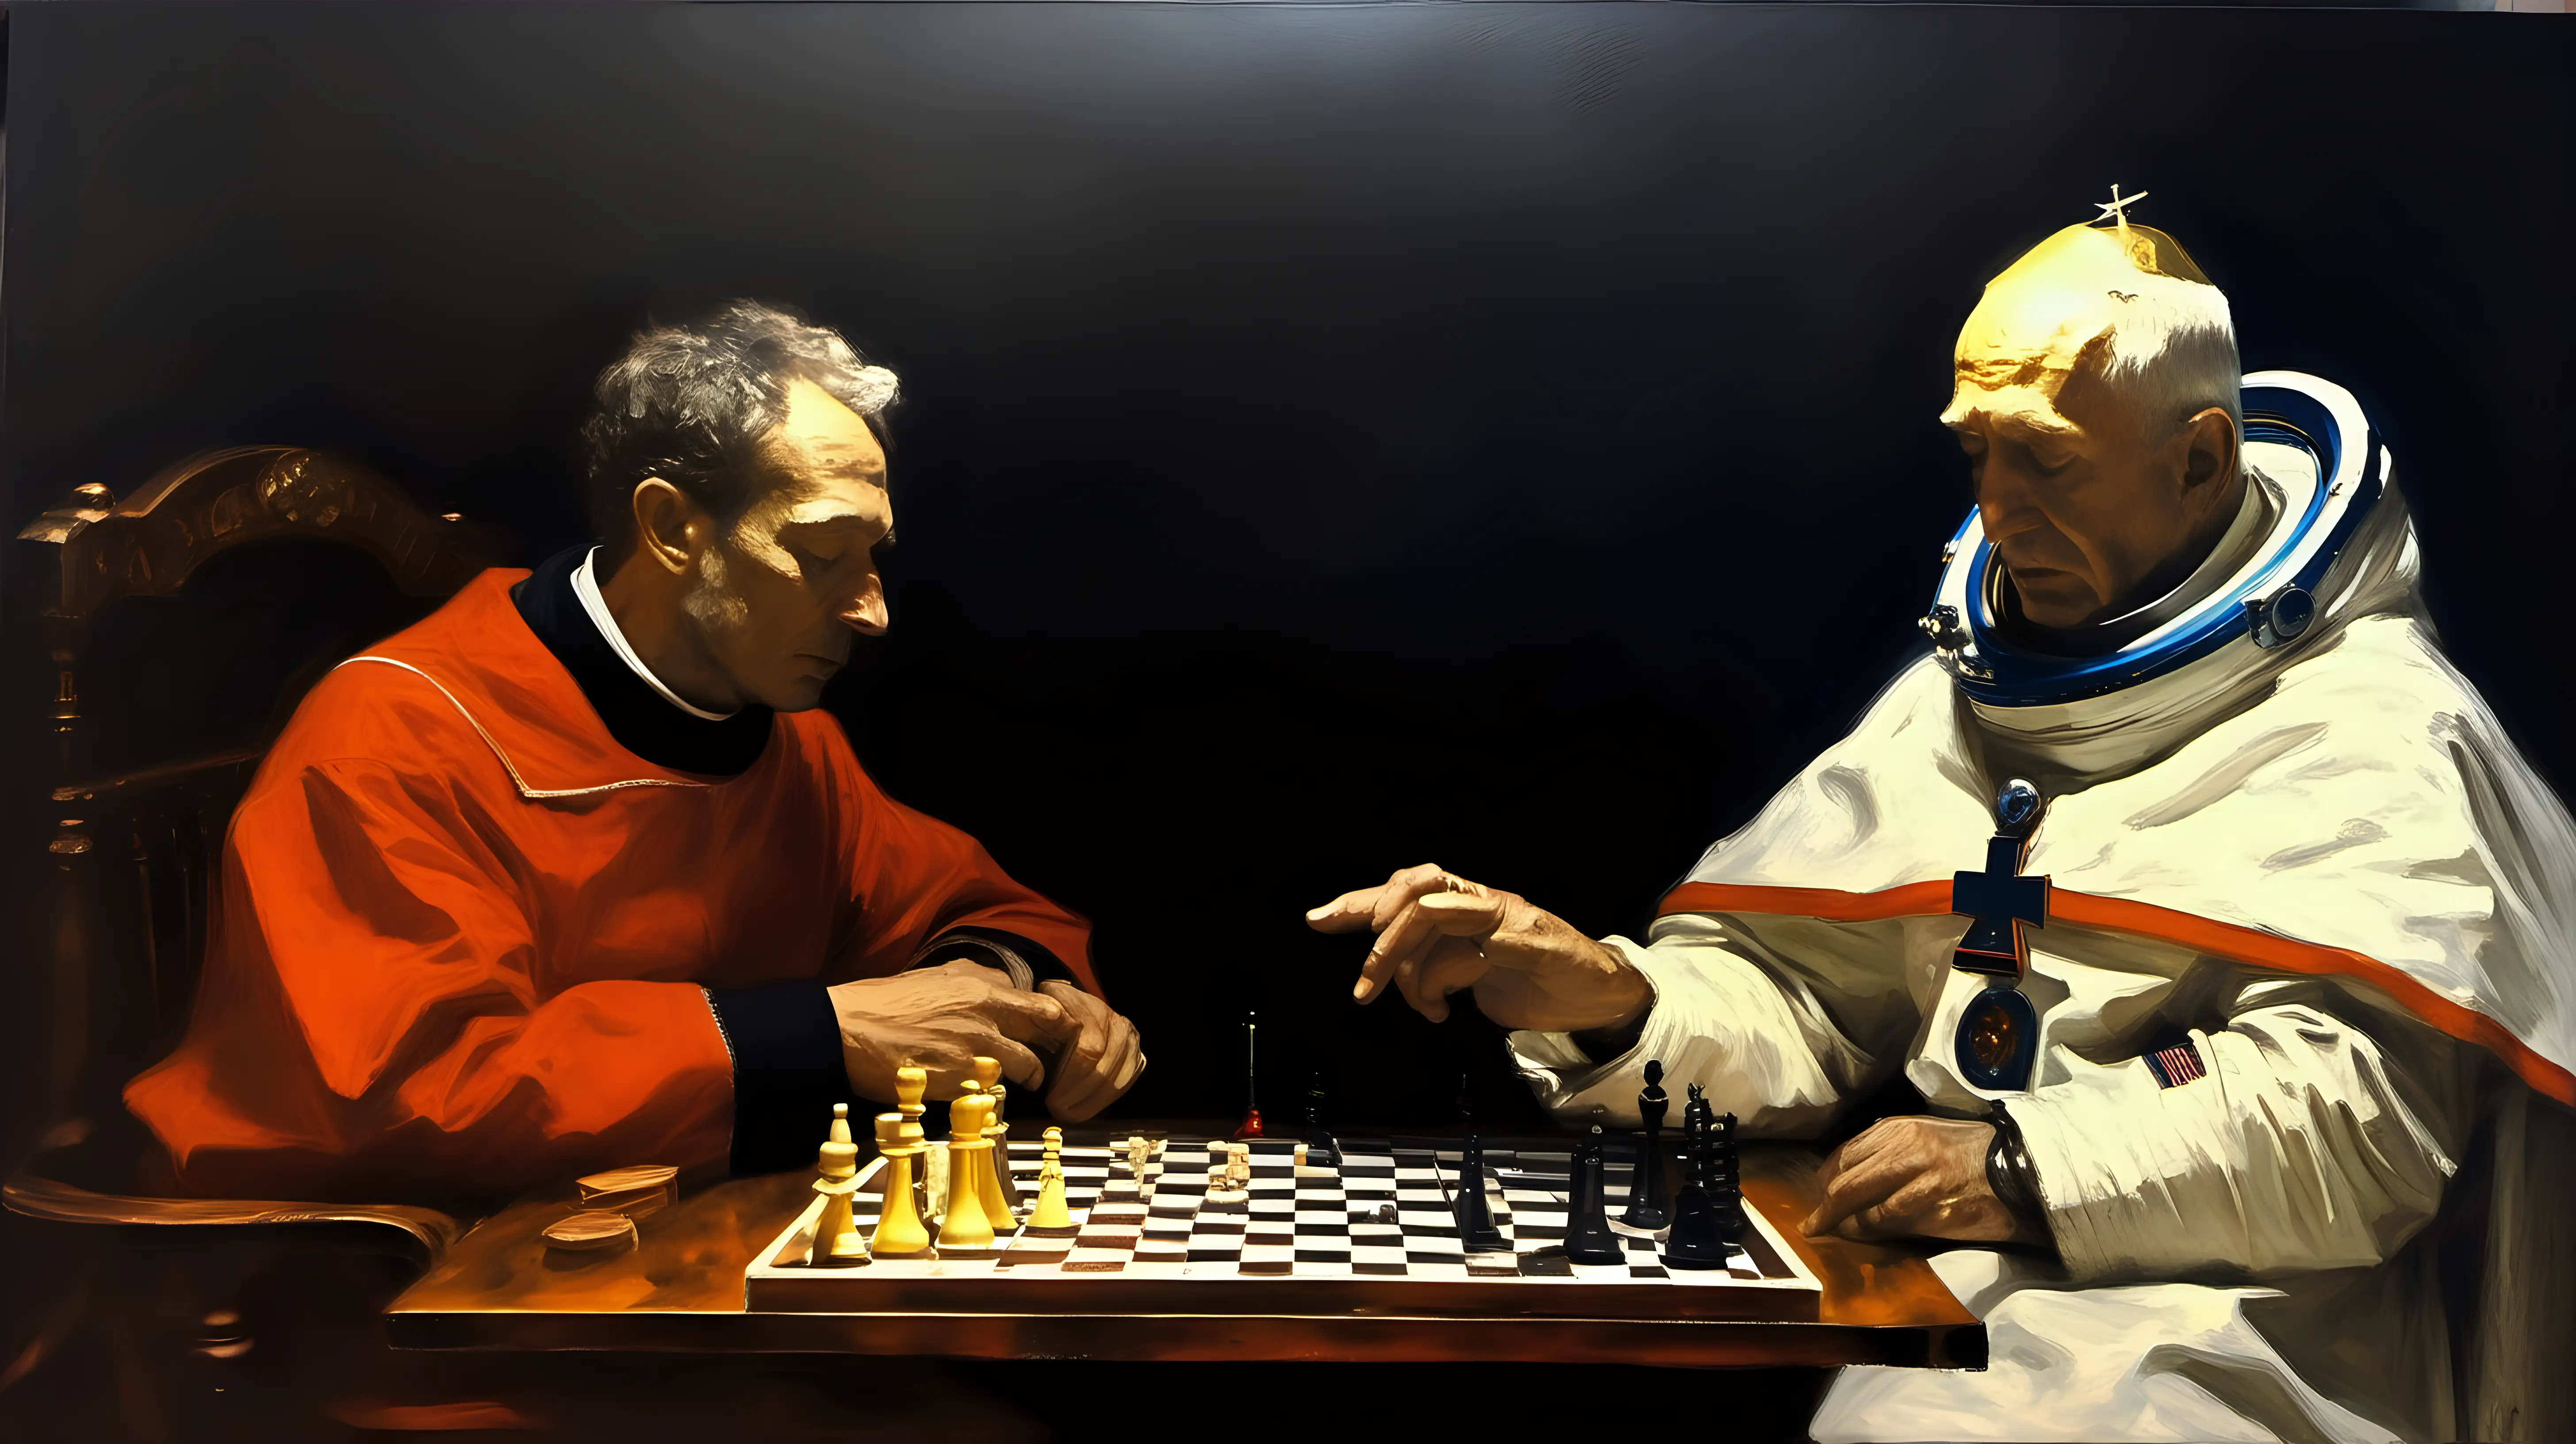 Astronaut and Priest Chess Match in Ilya Repin Style